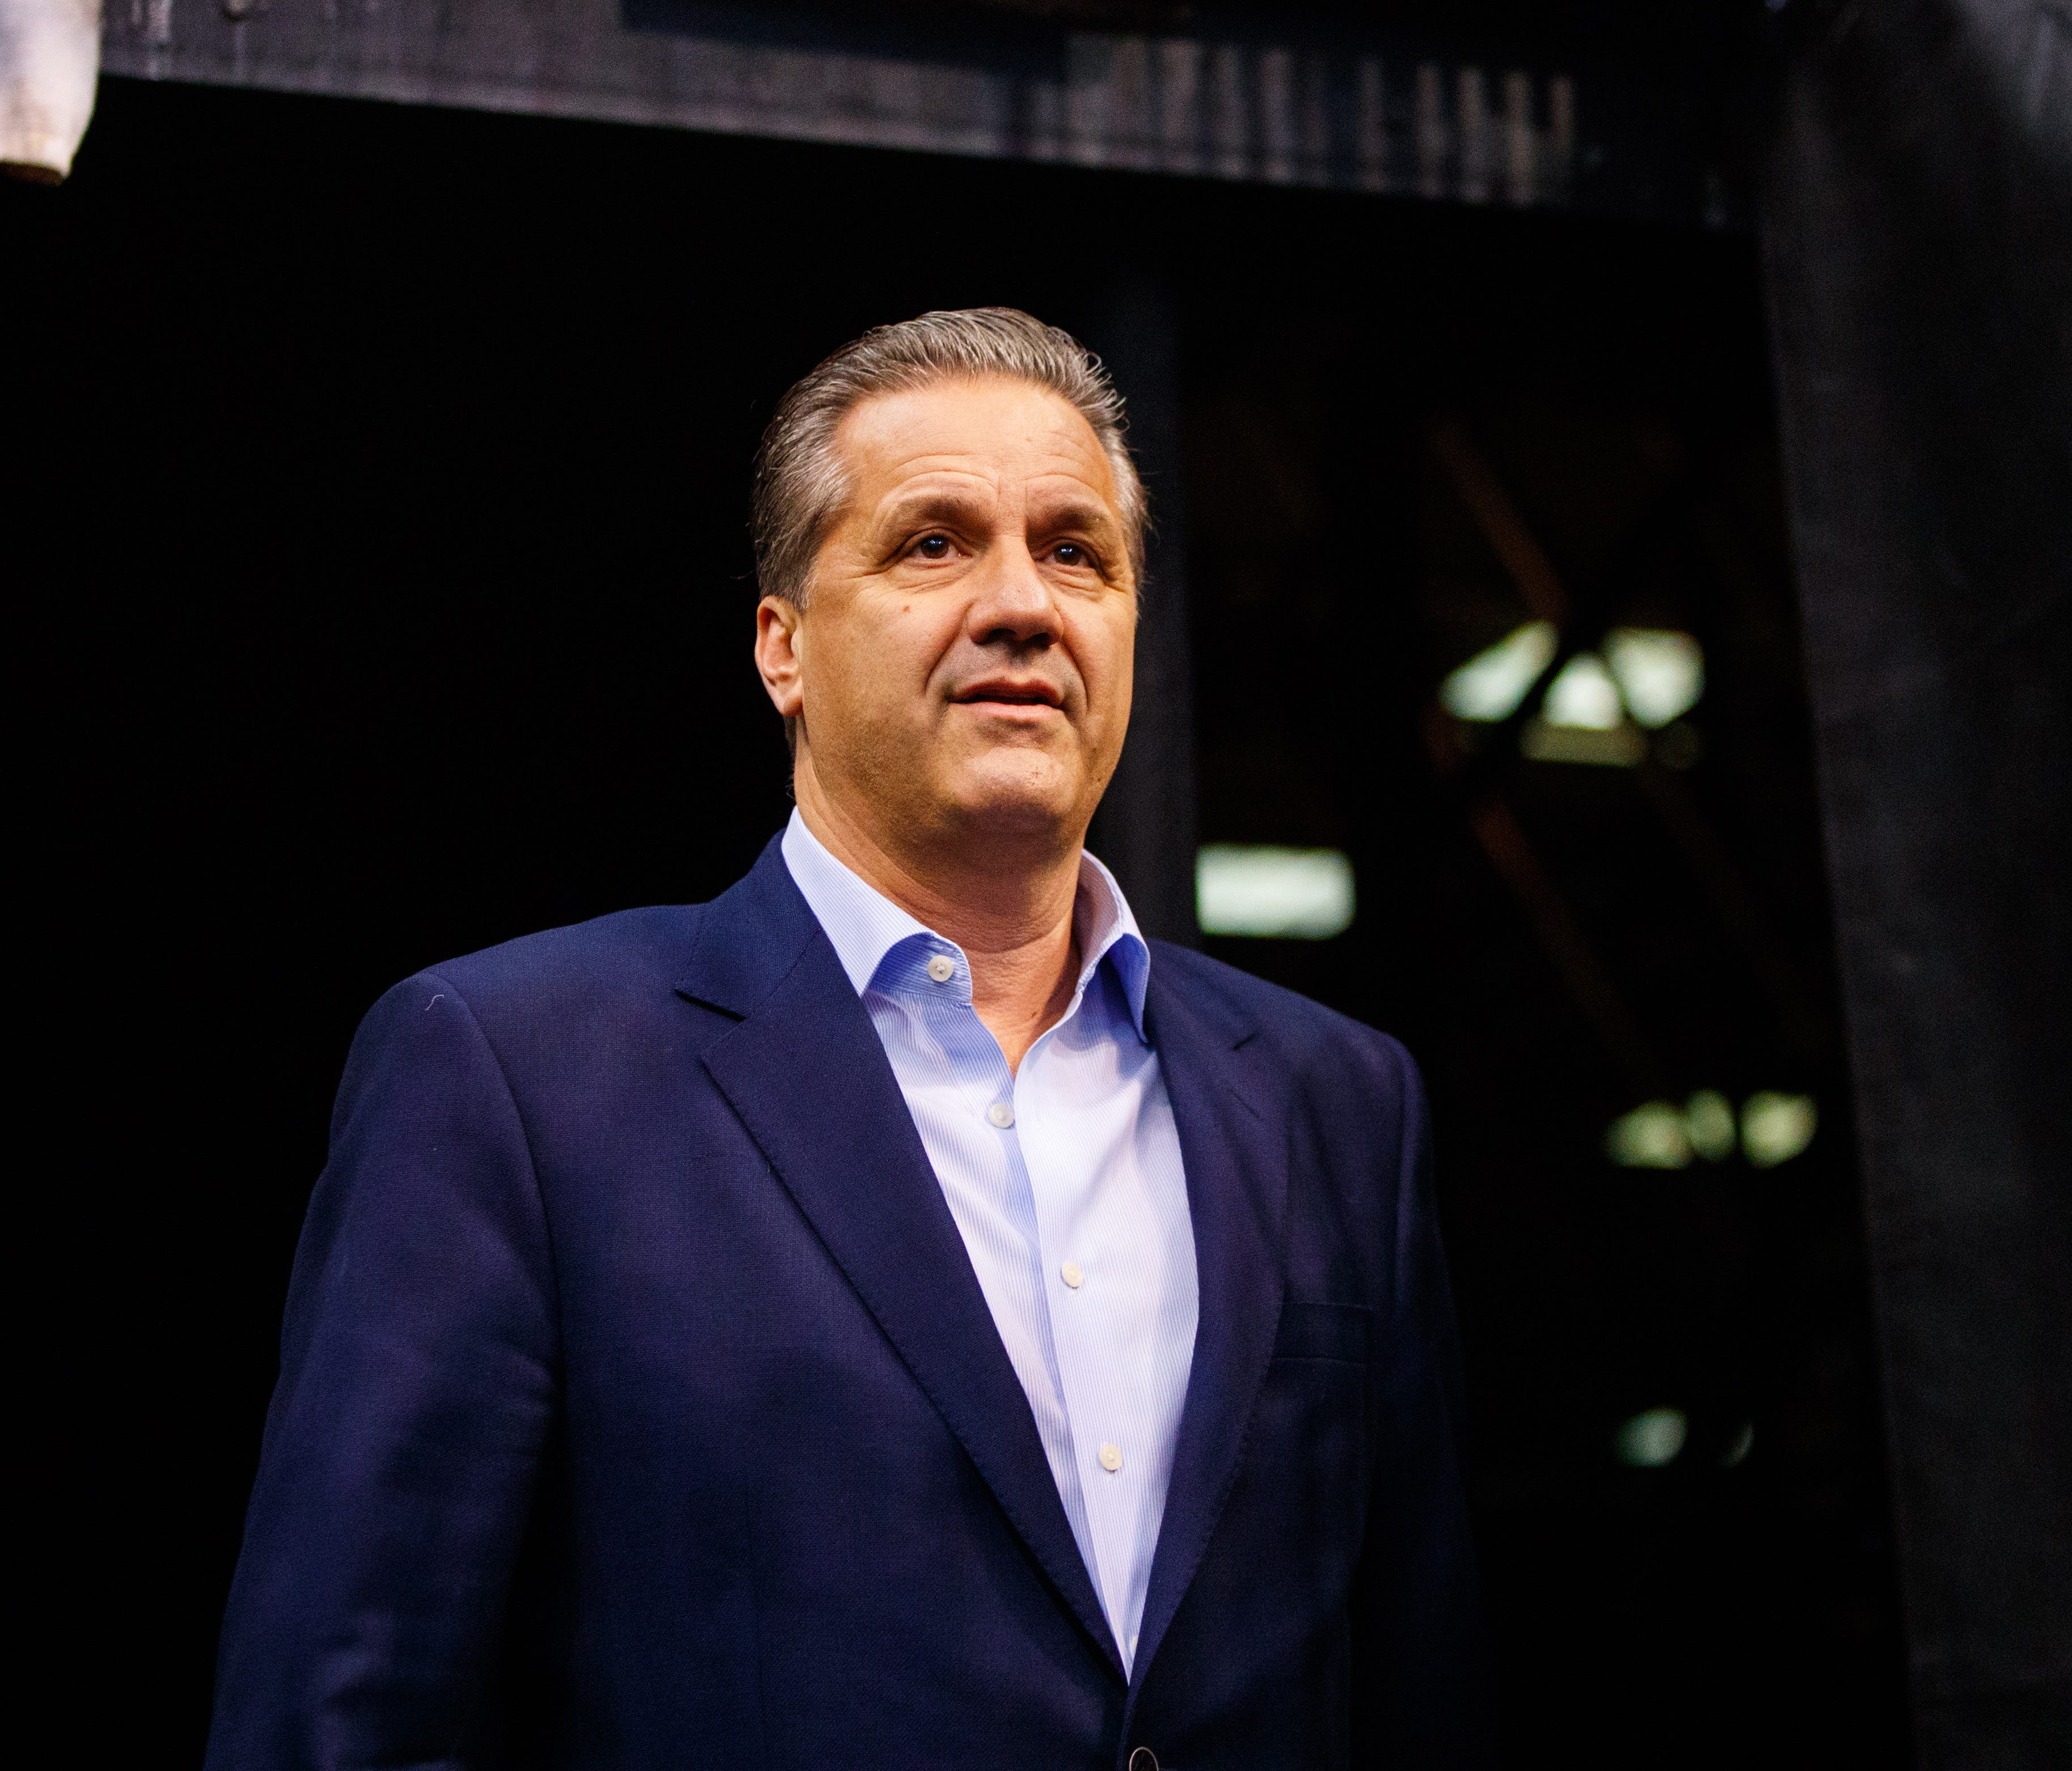 Kentucky Wildcats basketball head coach John Calipari in attendance of the Phoenix Suns game against the Los Angeles Clippers at Talking Stick Resort Arena.